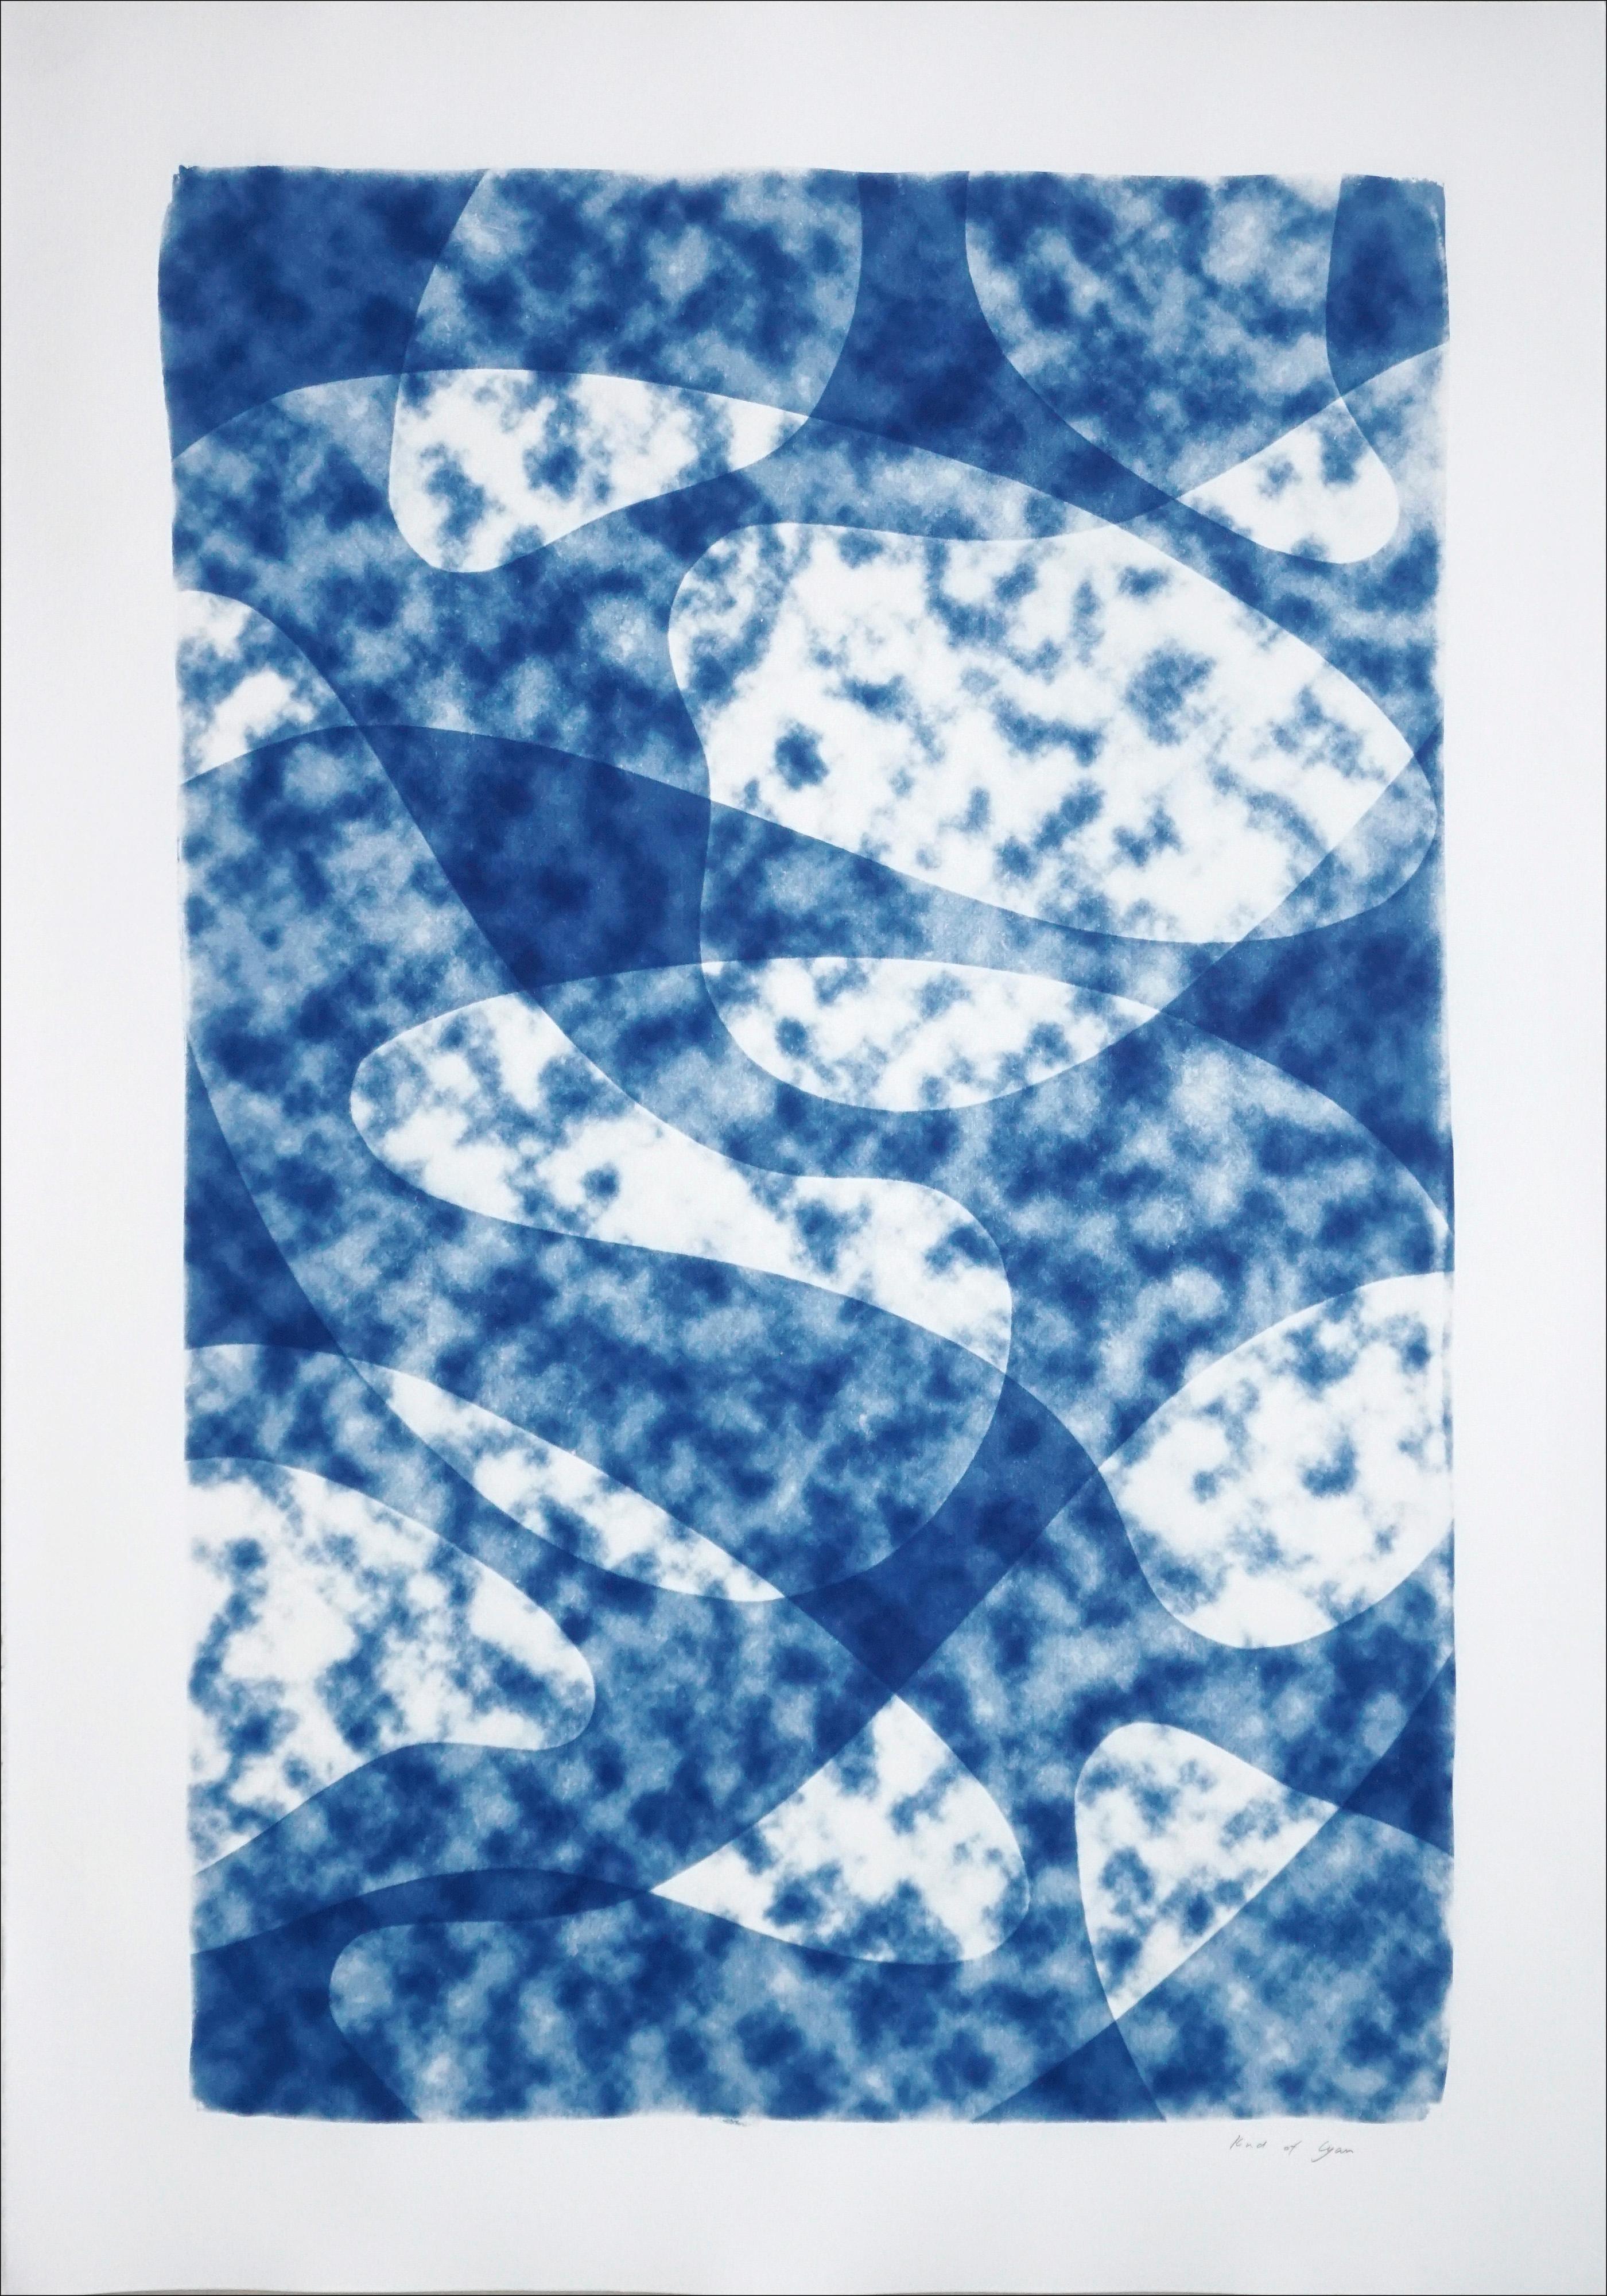 Looking Up at The Clouds, Unique Monotype in Blue Tones, Avant-Garde Shapes 